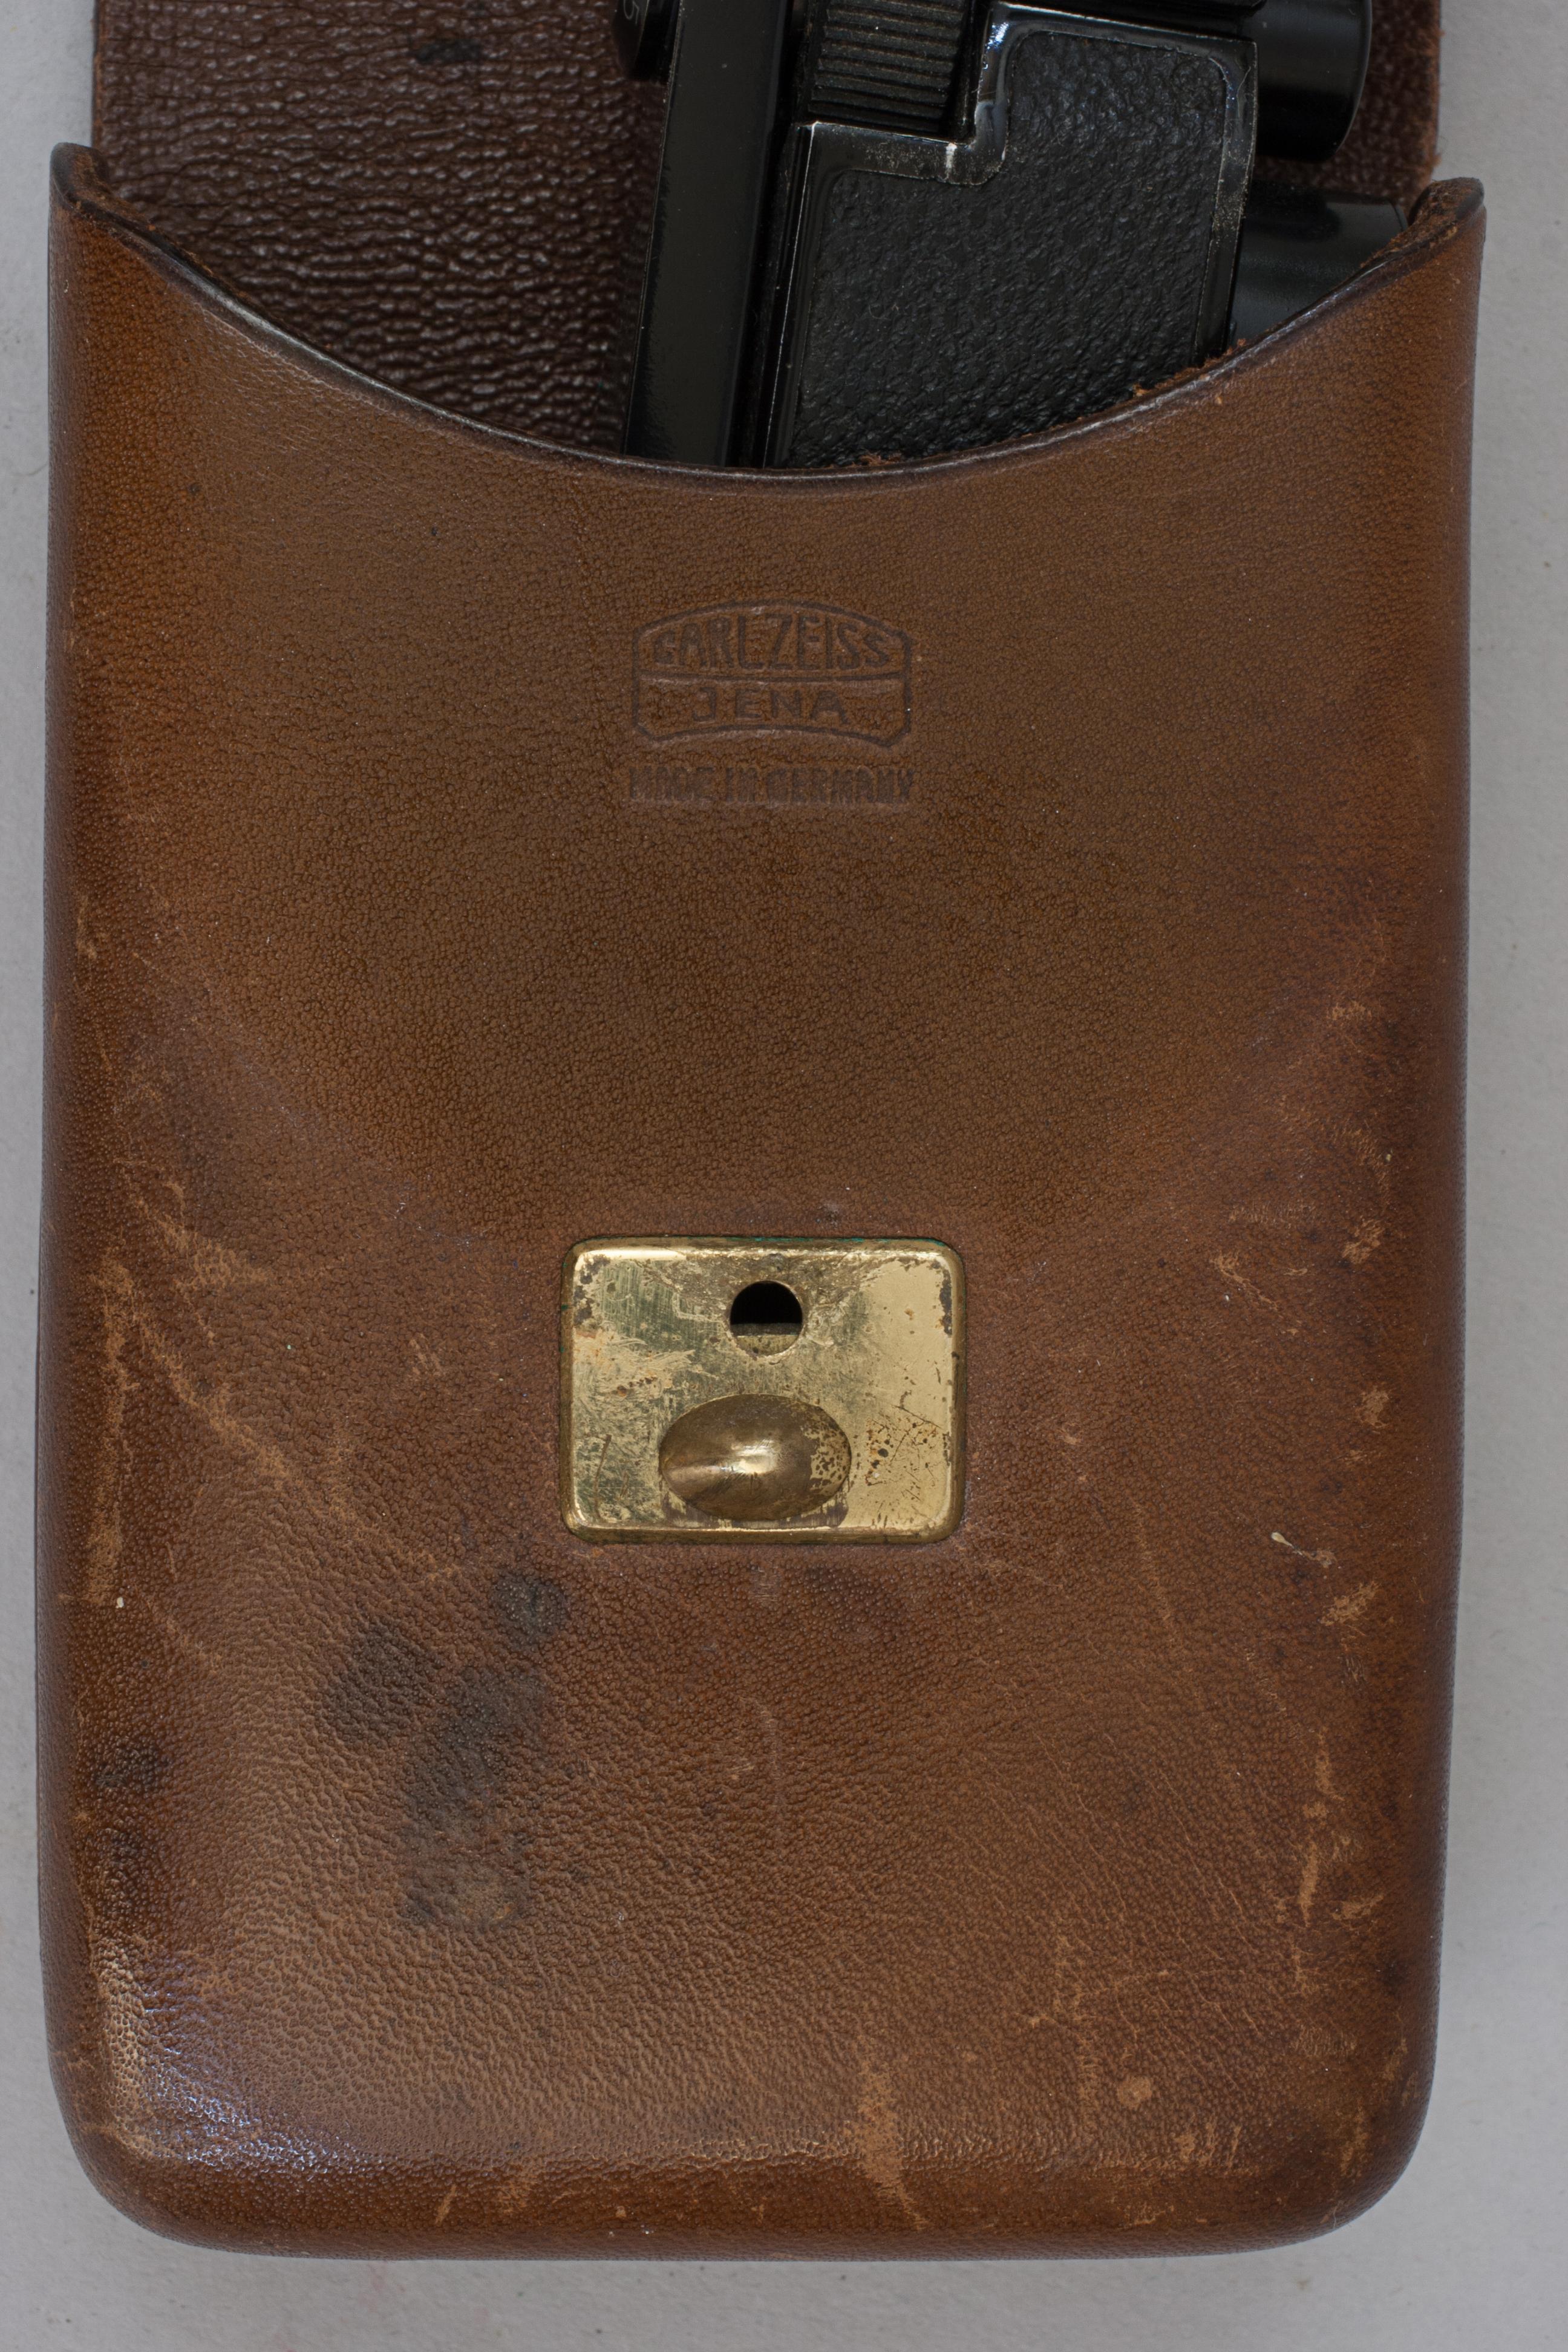 Carl Zeiss Binoculars 3.5 X 15, in Leather Case In Good Condition For Sale In Oxfordshire, GB